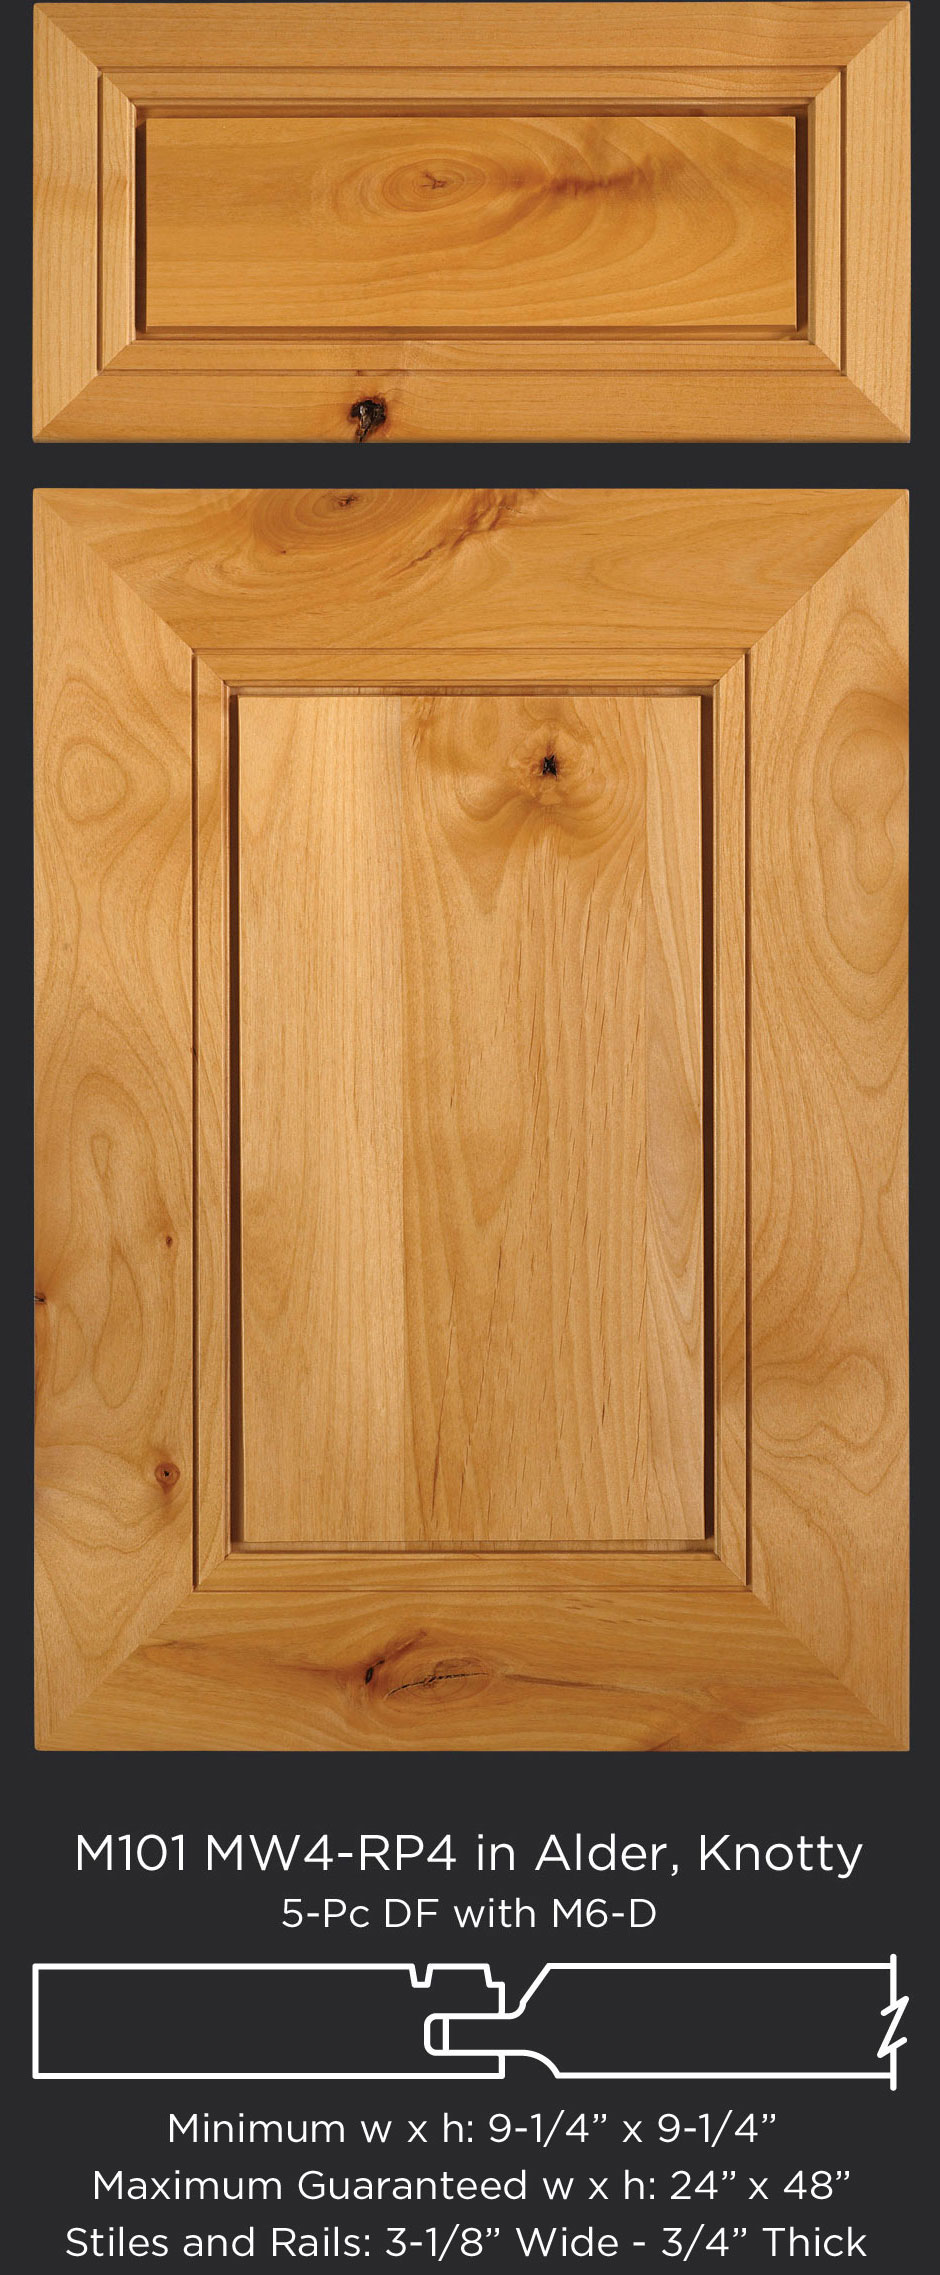 Mitered Cabinet Door M101 MW4-RP4 in Alder, Knotty and 5-Piece drawer front with M6-D